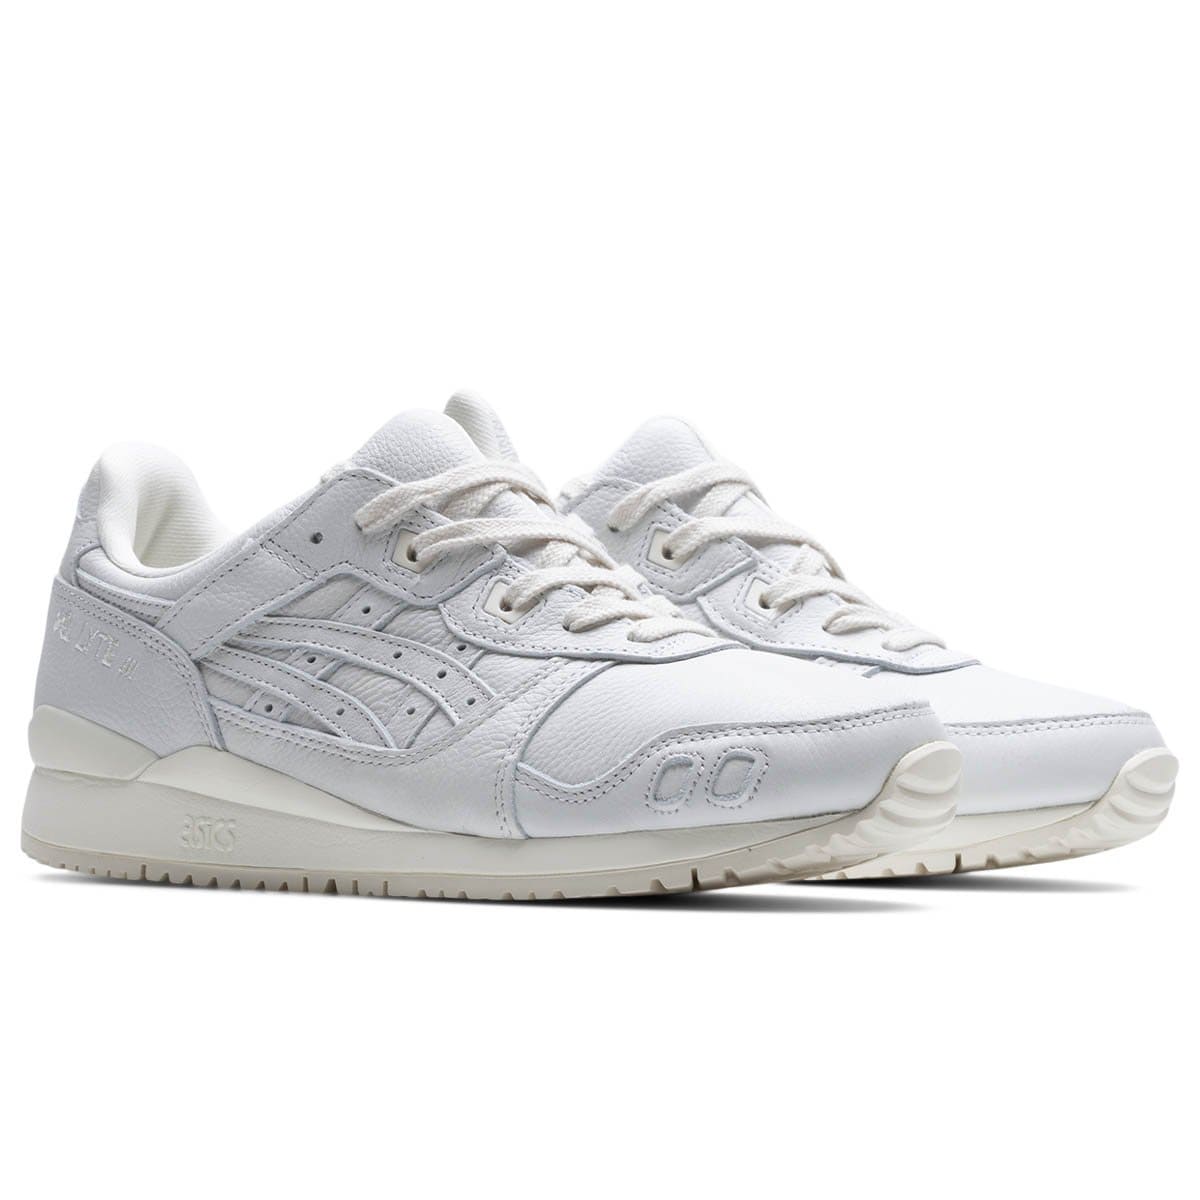 reunirse Conquista Nervio sneakers ASICS mujer azules | GEL-LYTE III OG – GmarShops Store